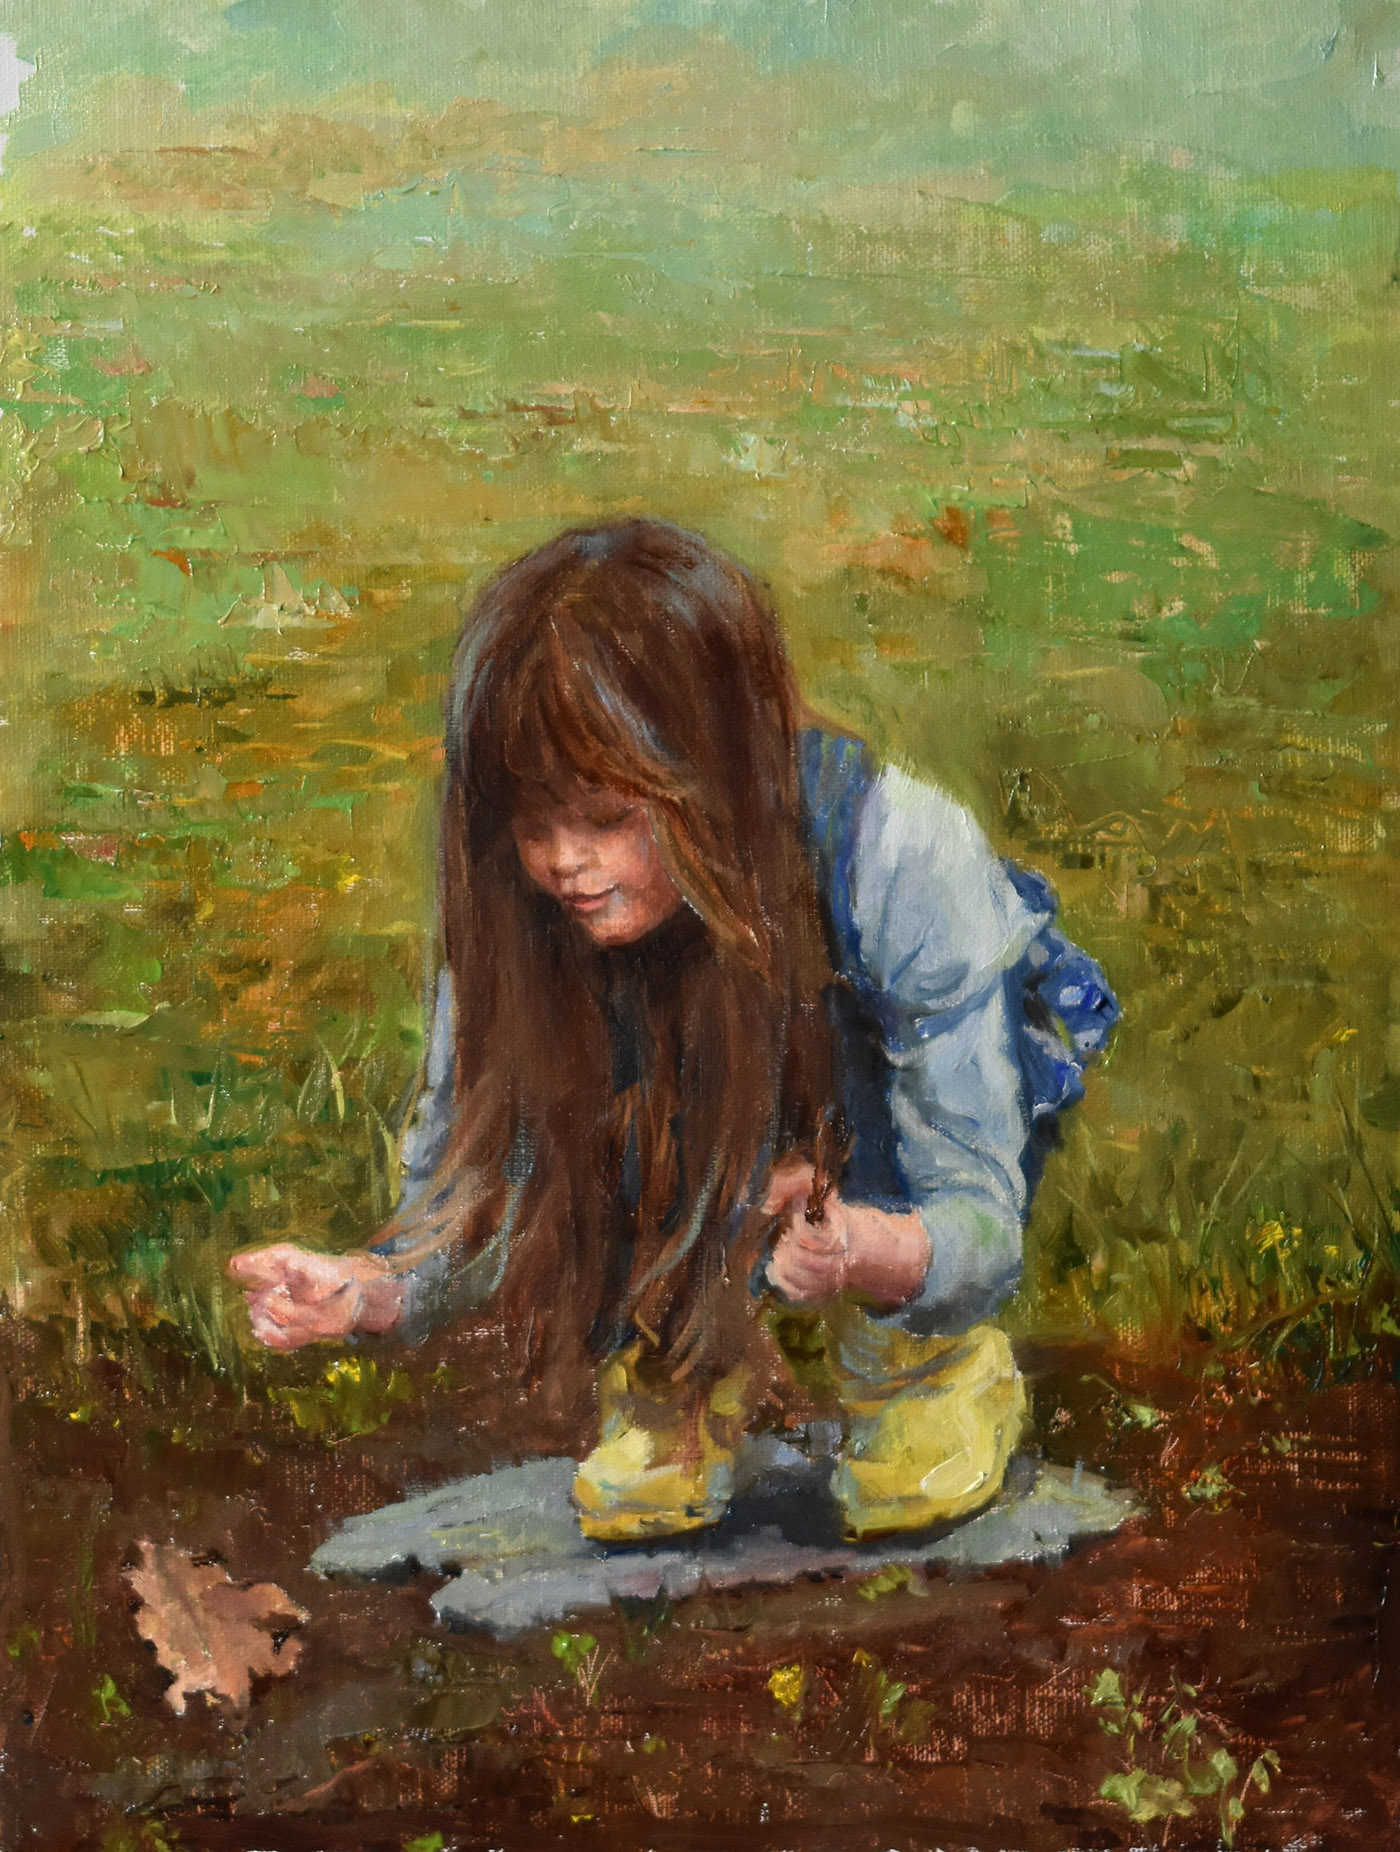 young child picking flowers from a garden